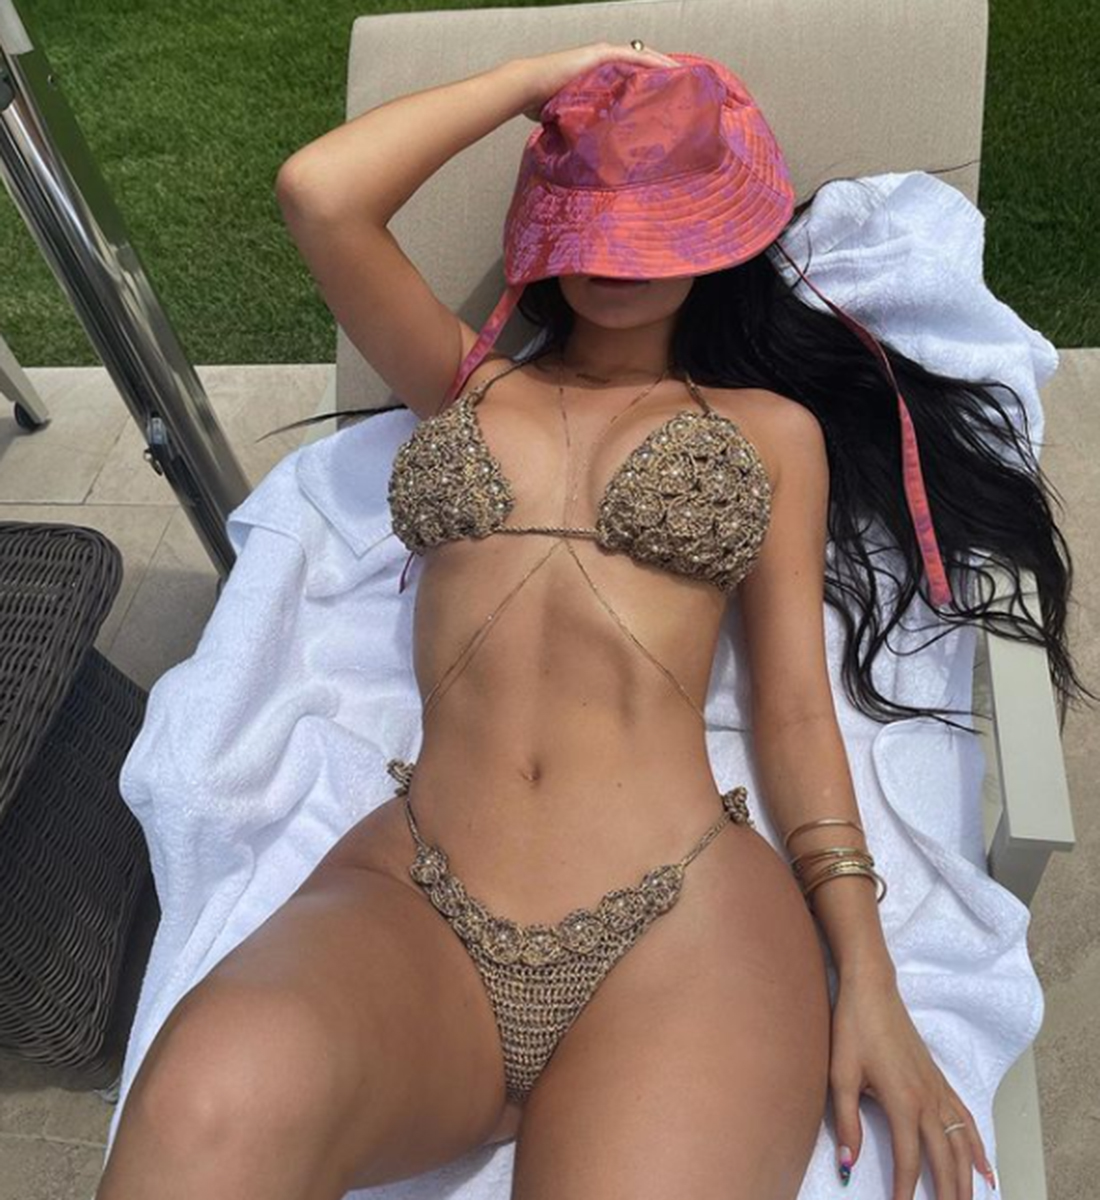 Kylie πη struck again with outrageously revealing photos! 1